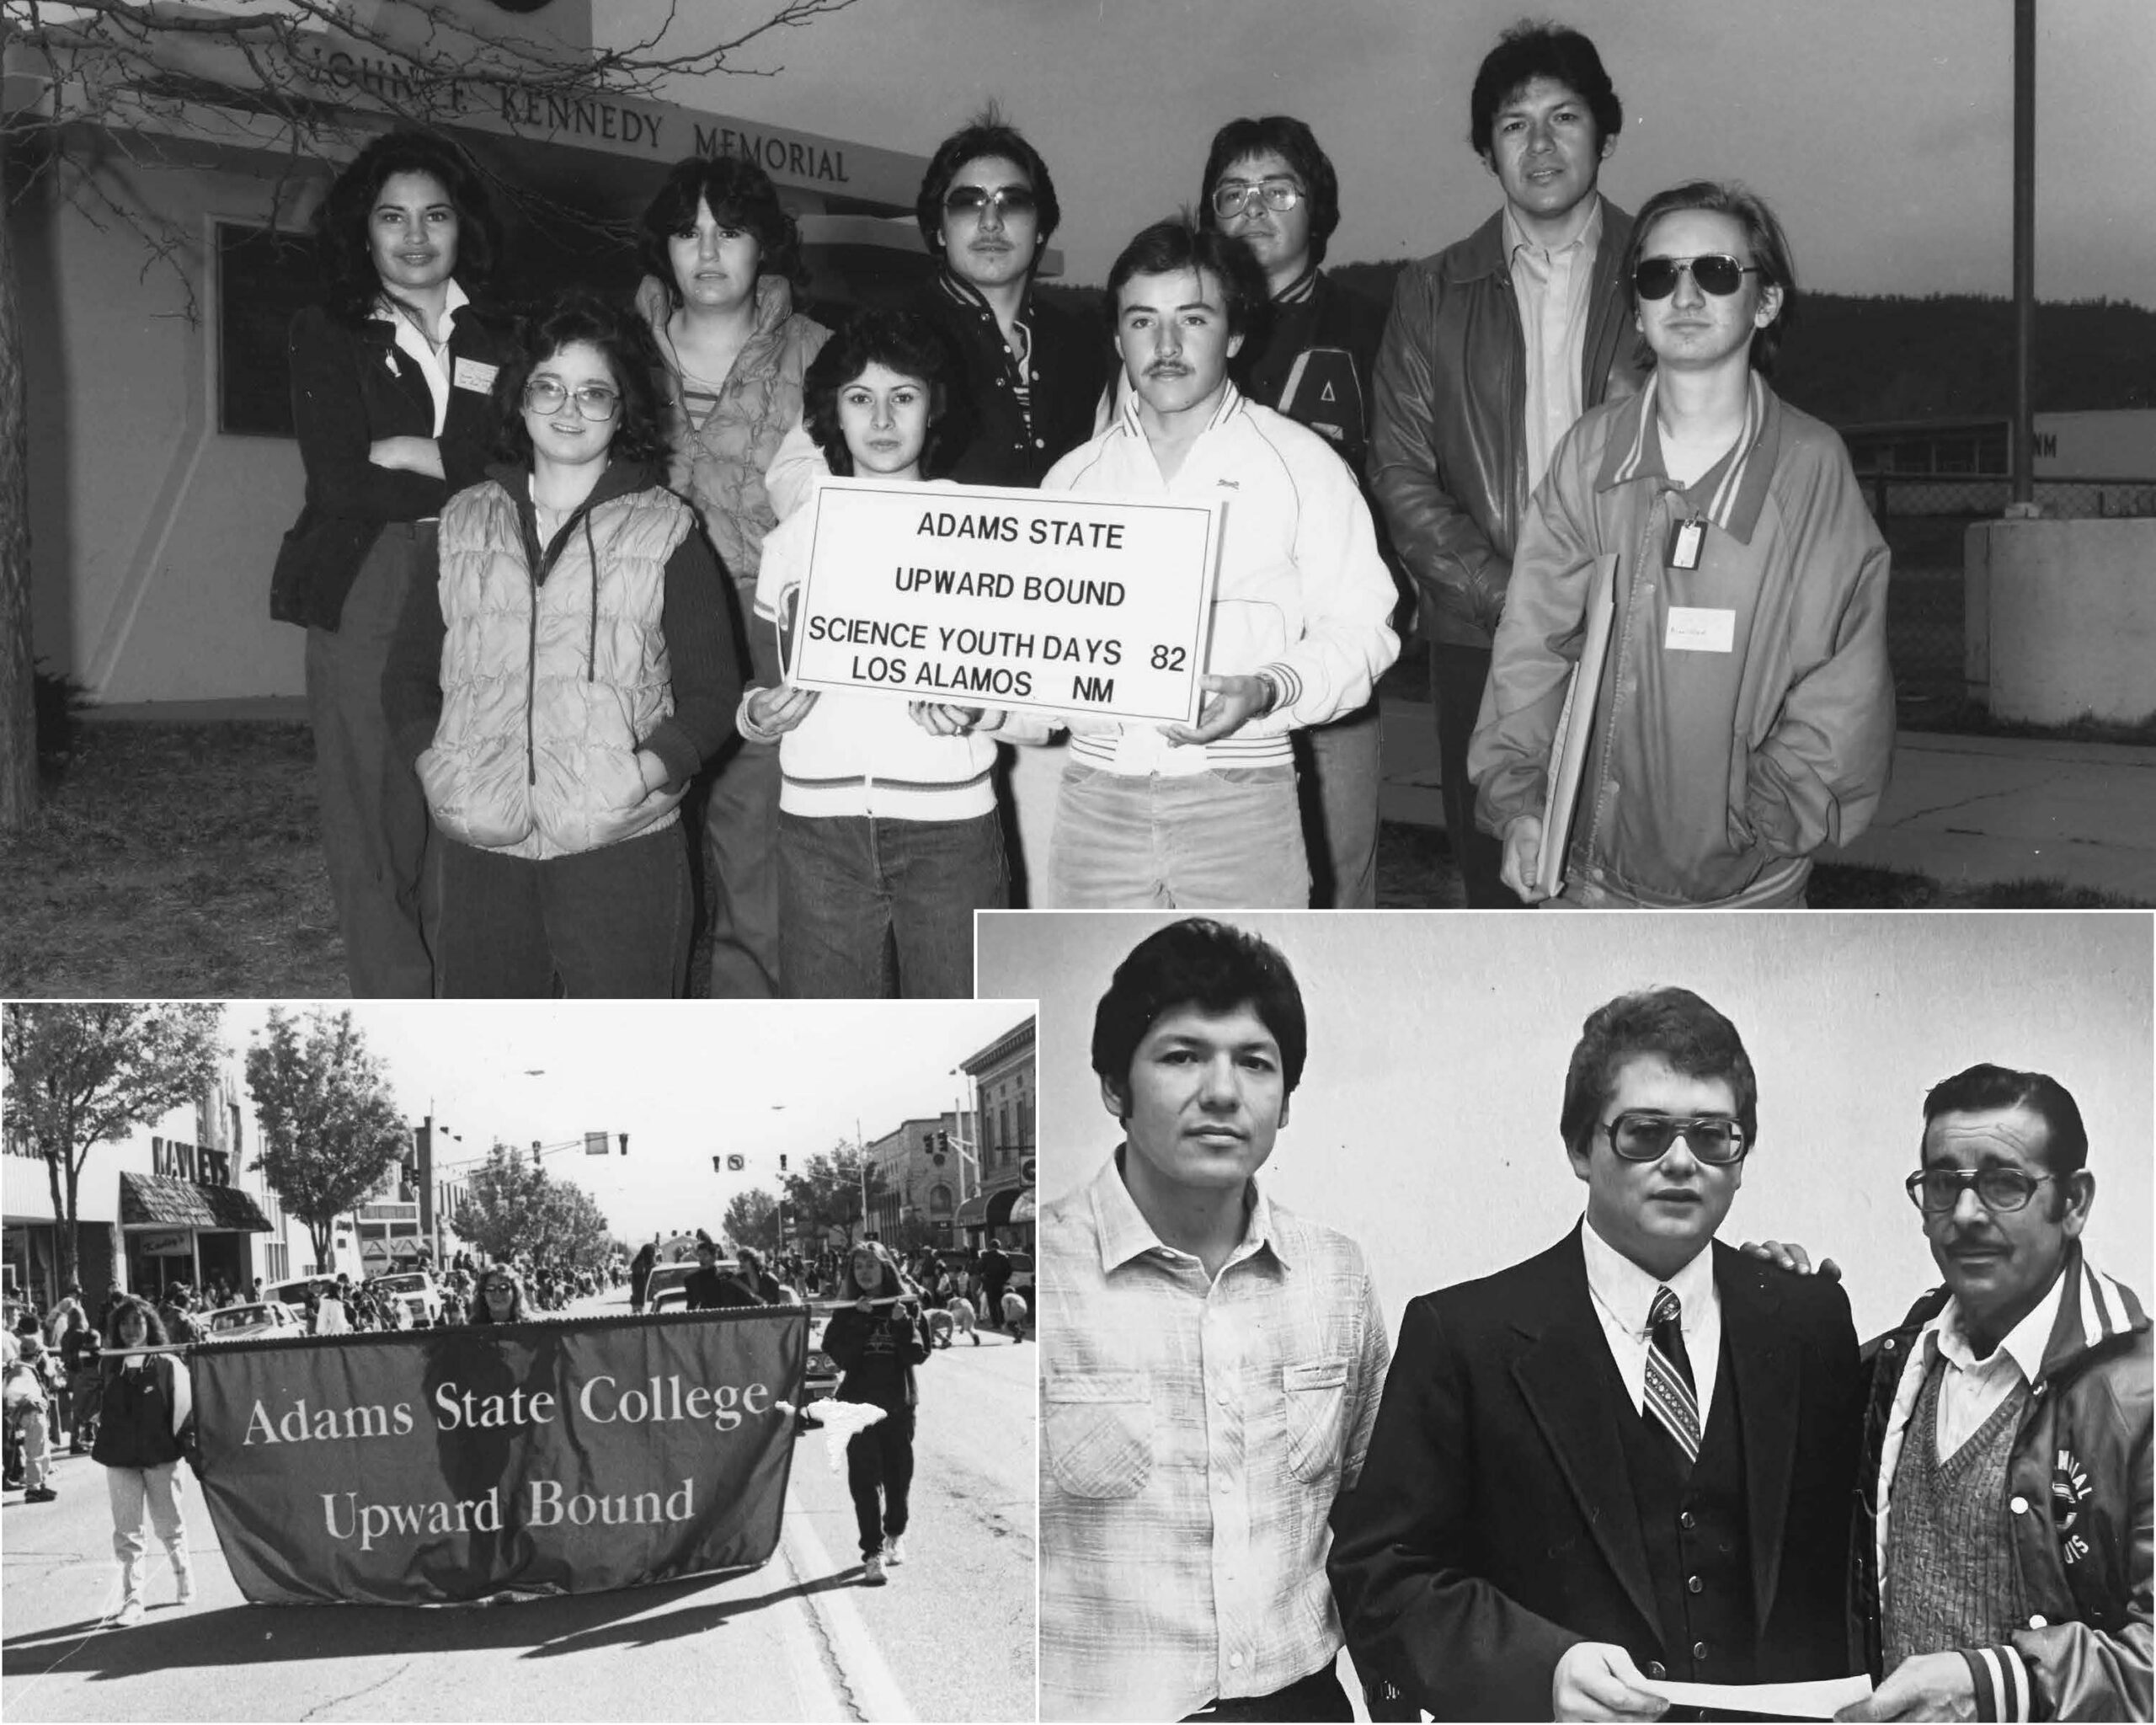 A collage of black and white photos of Adams State Upward Bound students through the years, including one group with a sign that says "Adams State Upward Bound Science Youth Days 82 Los Alamos NM" and another group marching in a parade with a banner that says "Adams State College Upward Bound"